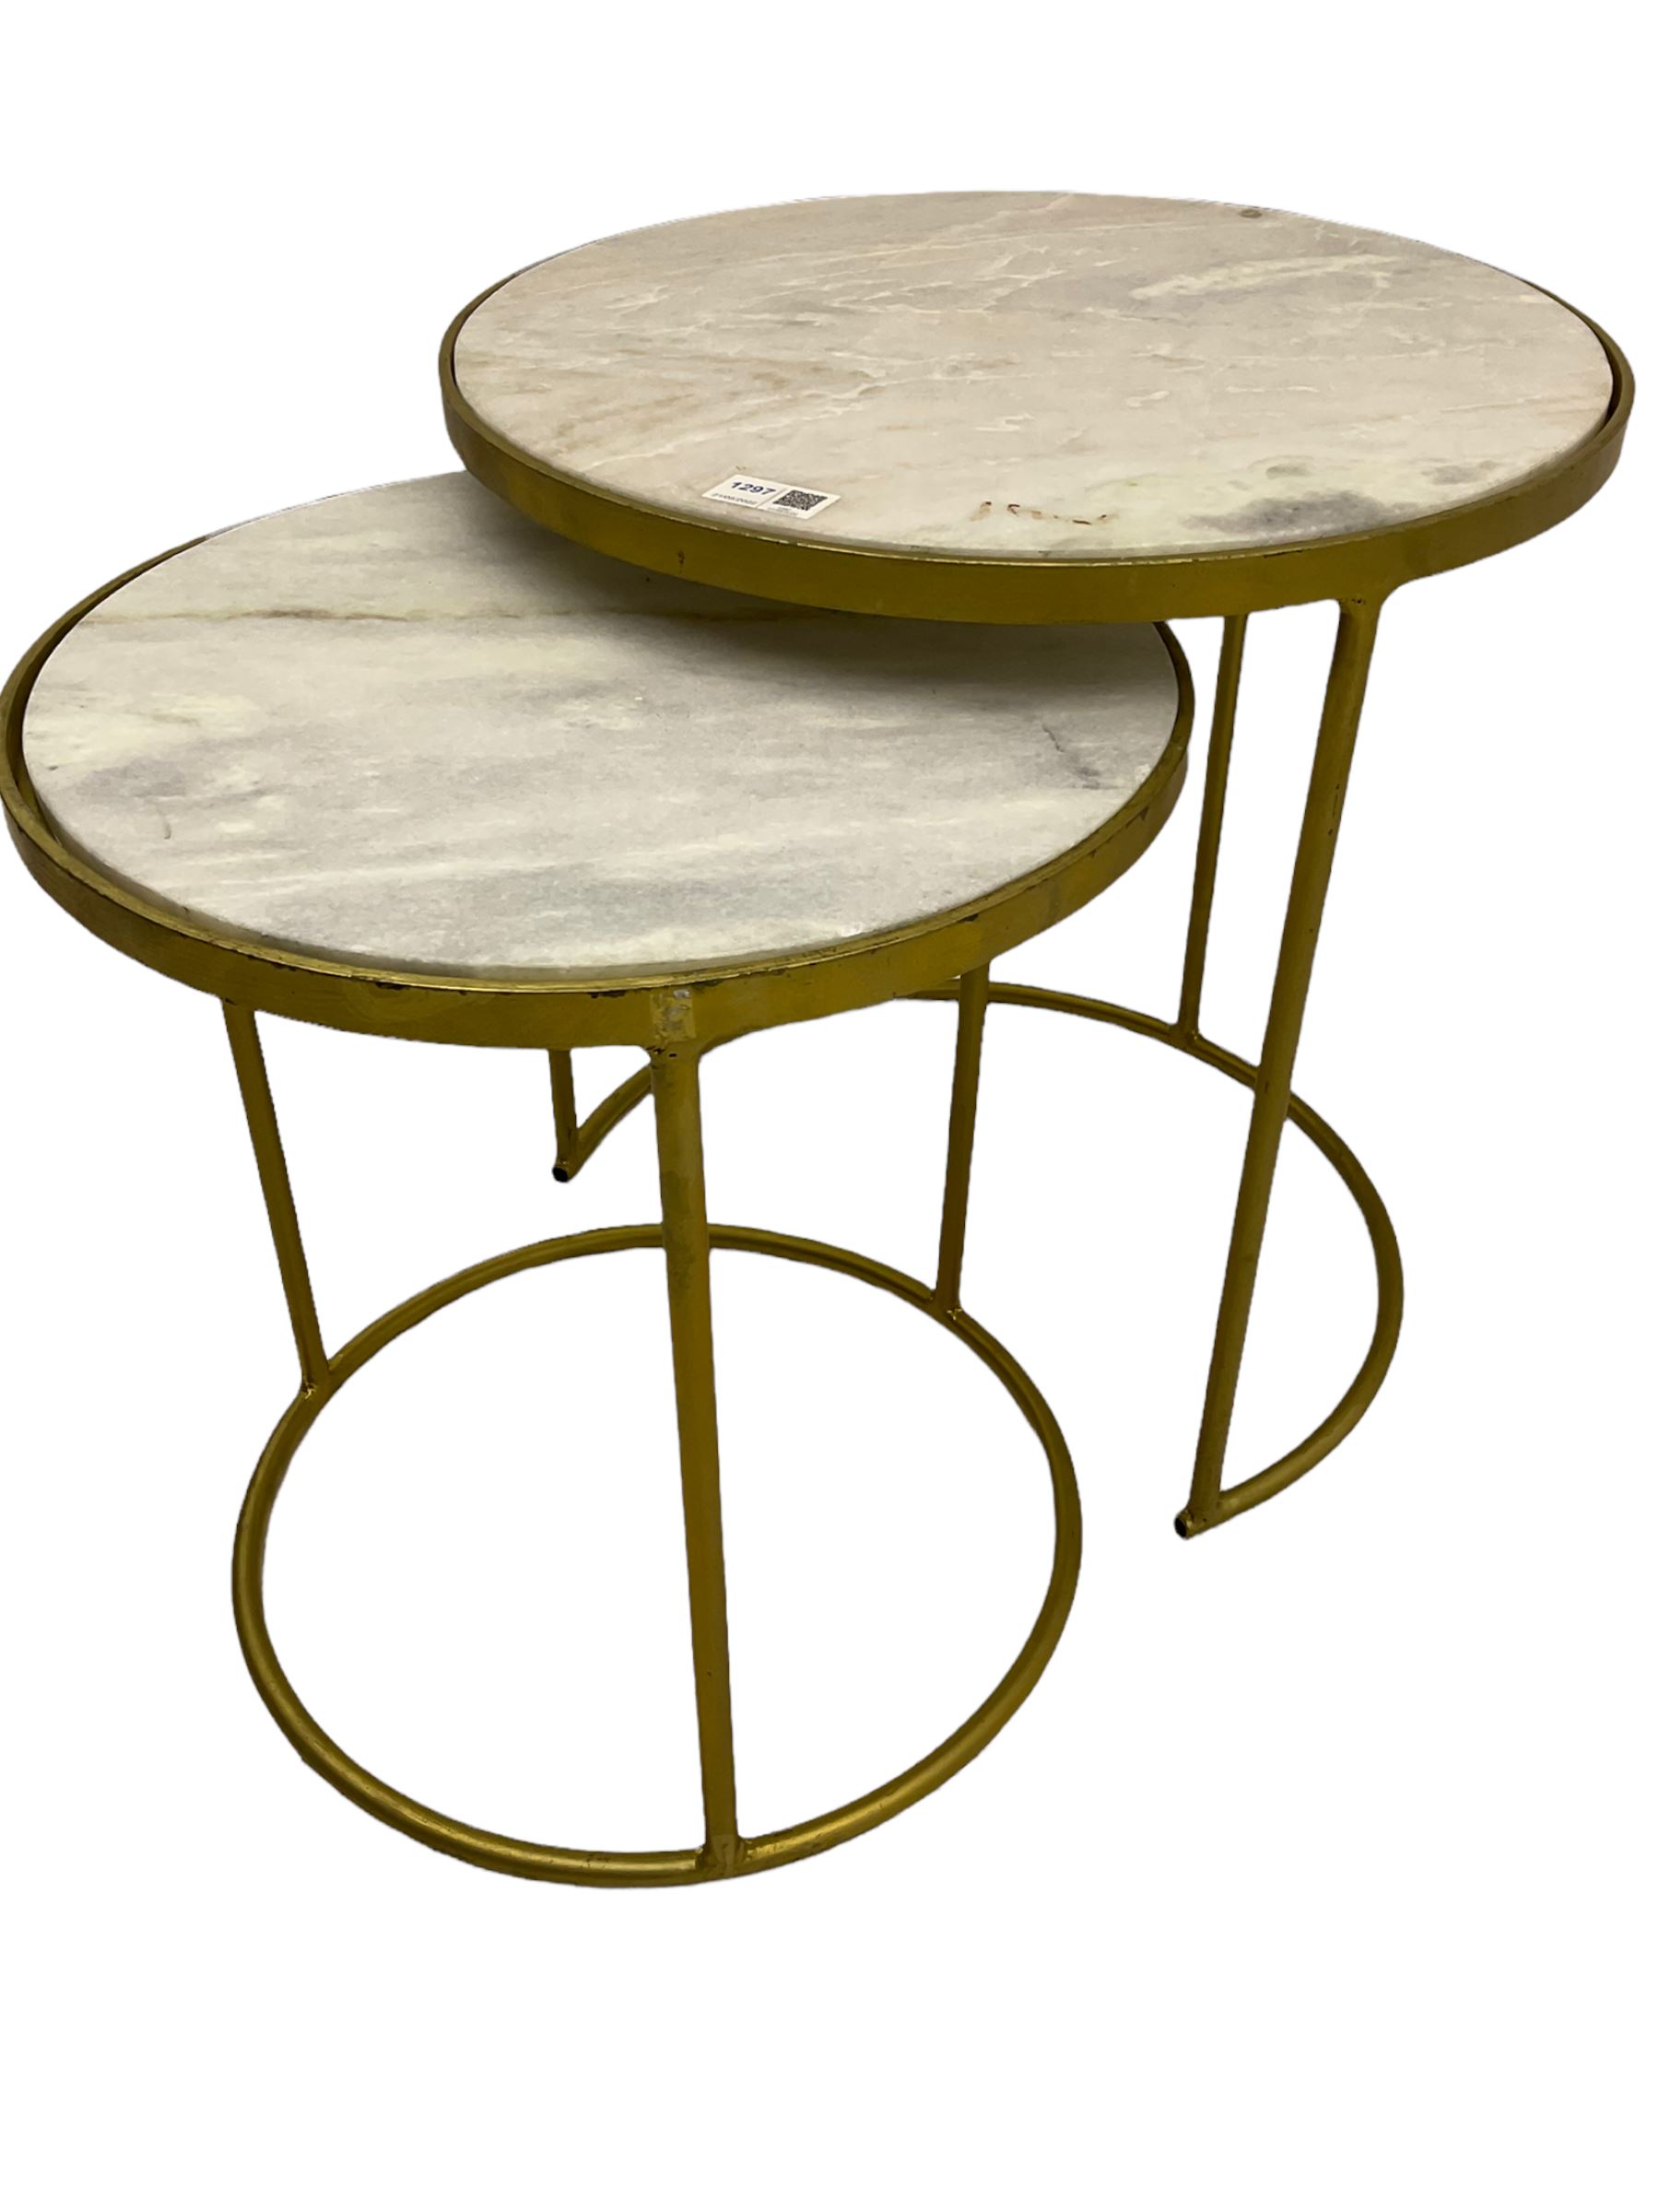 Two contemporary nesting side tables - Image 2 of 4